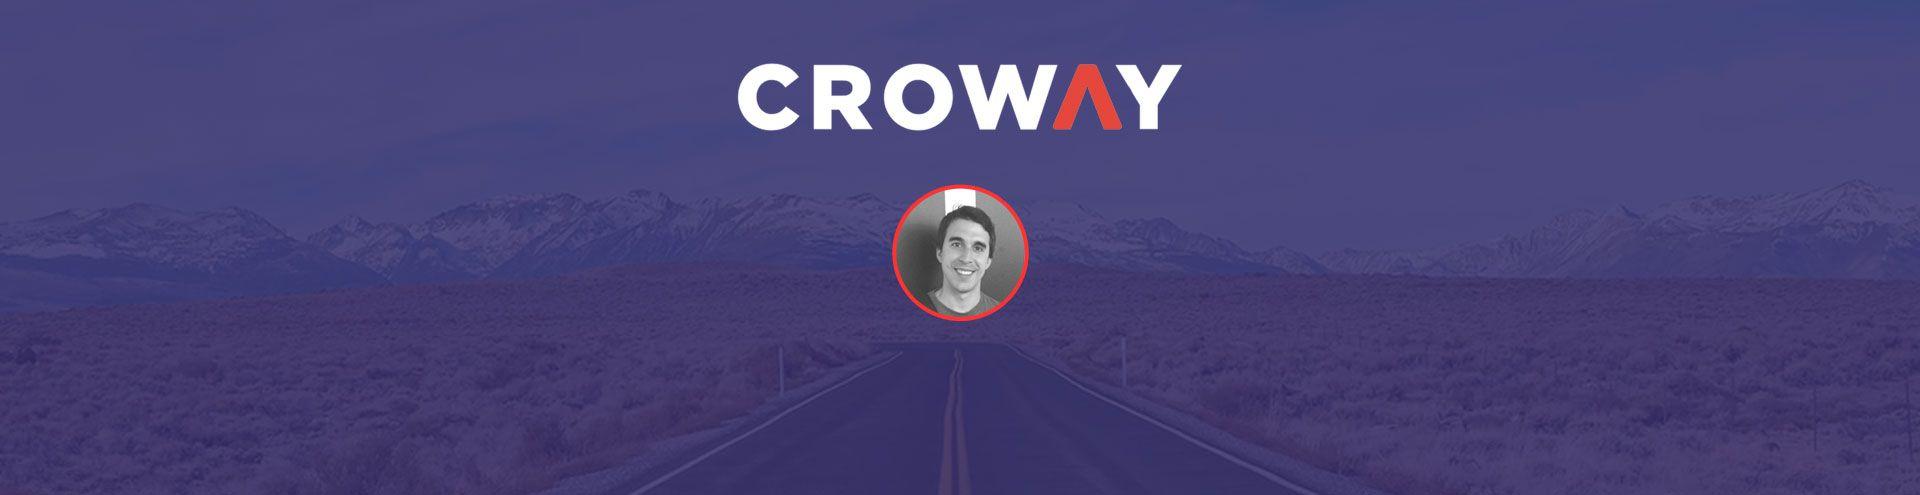 Handy Tips for Car Rental App Owners That Will Motivate You: Interview with Croway Founder